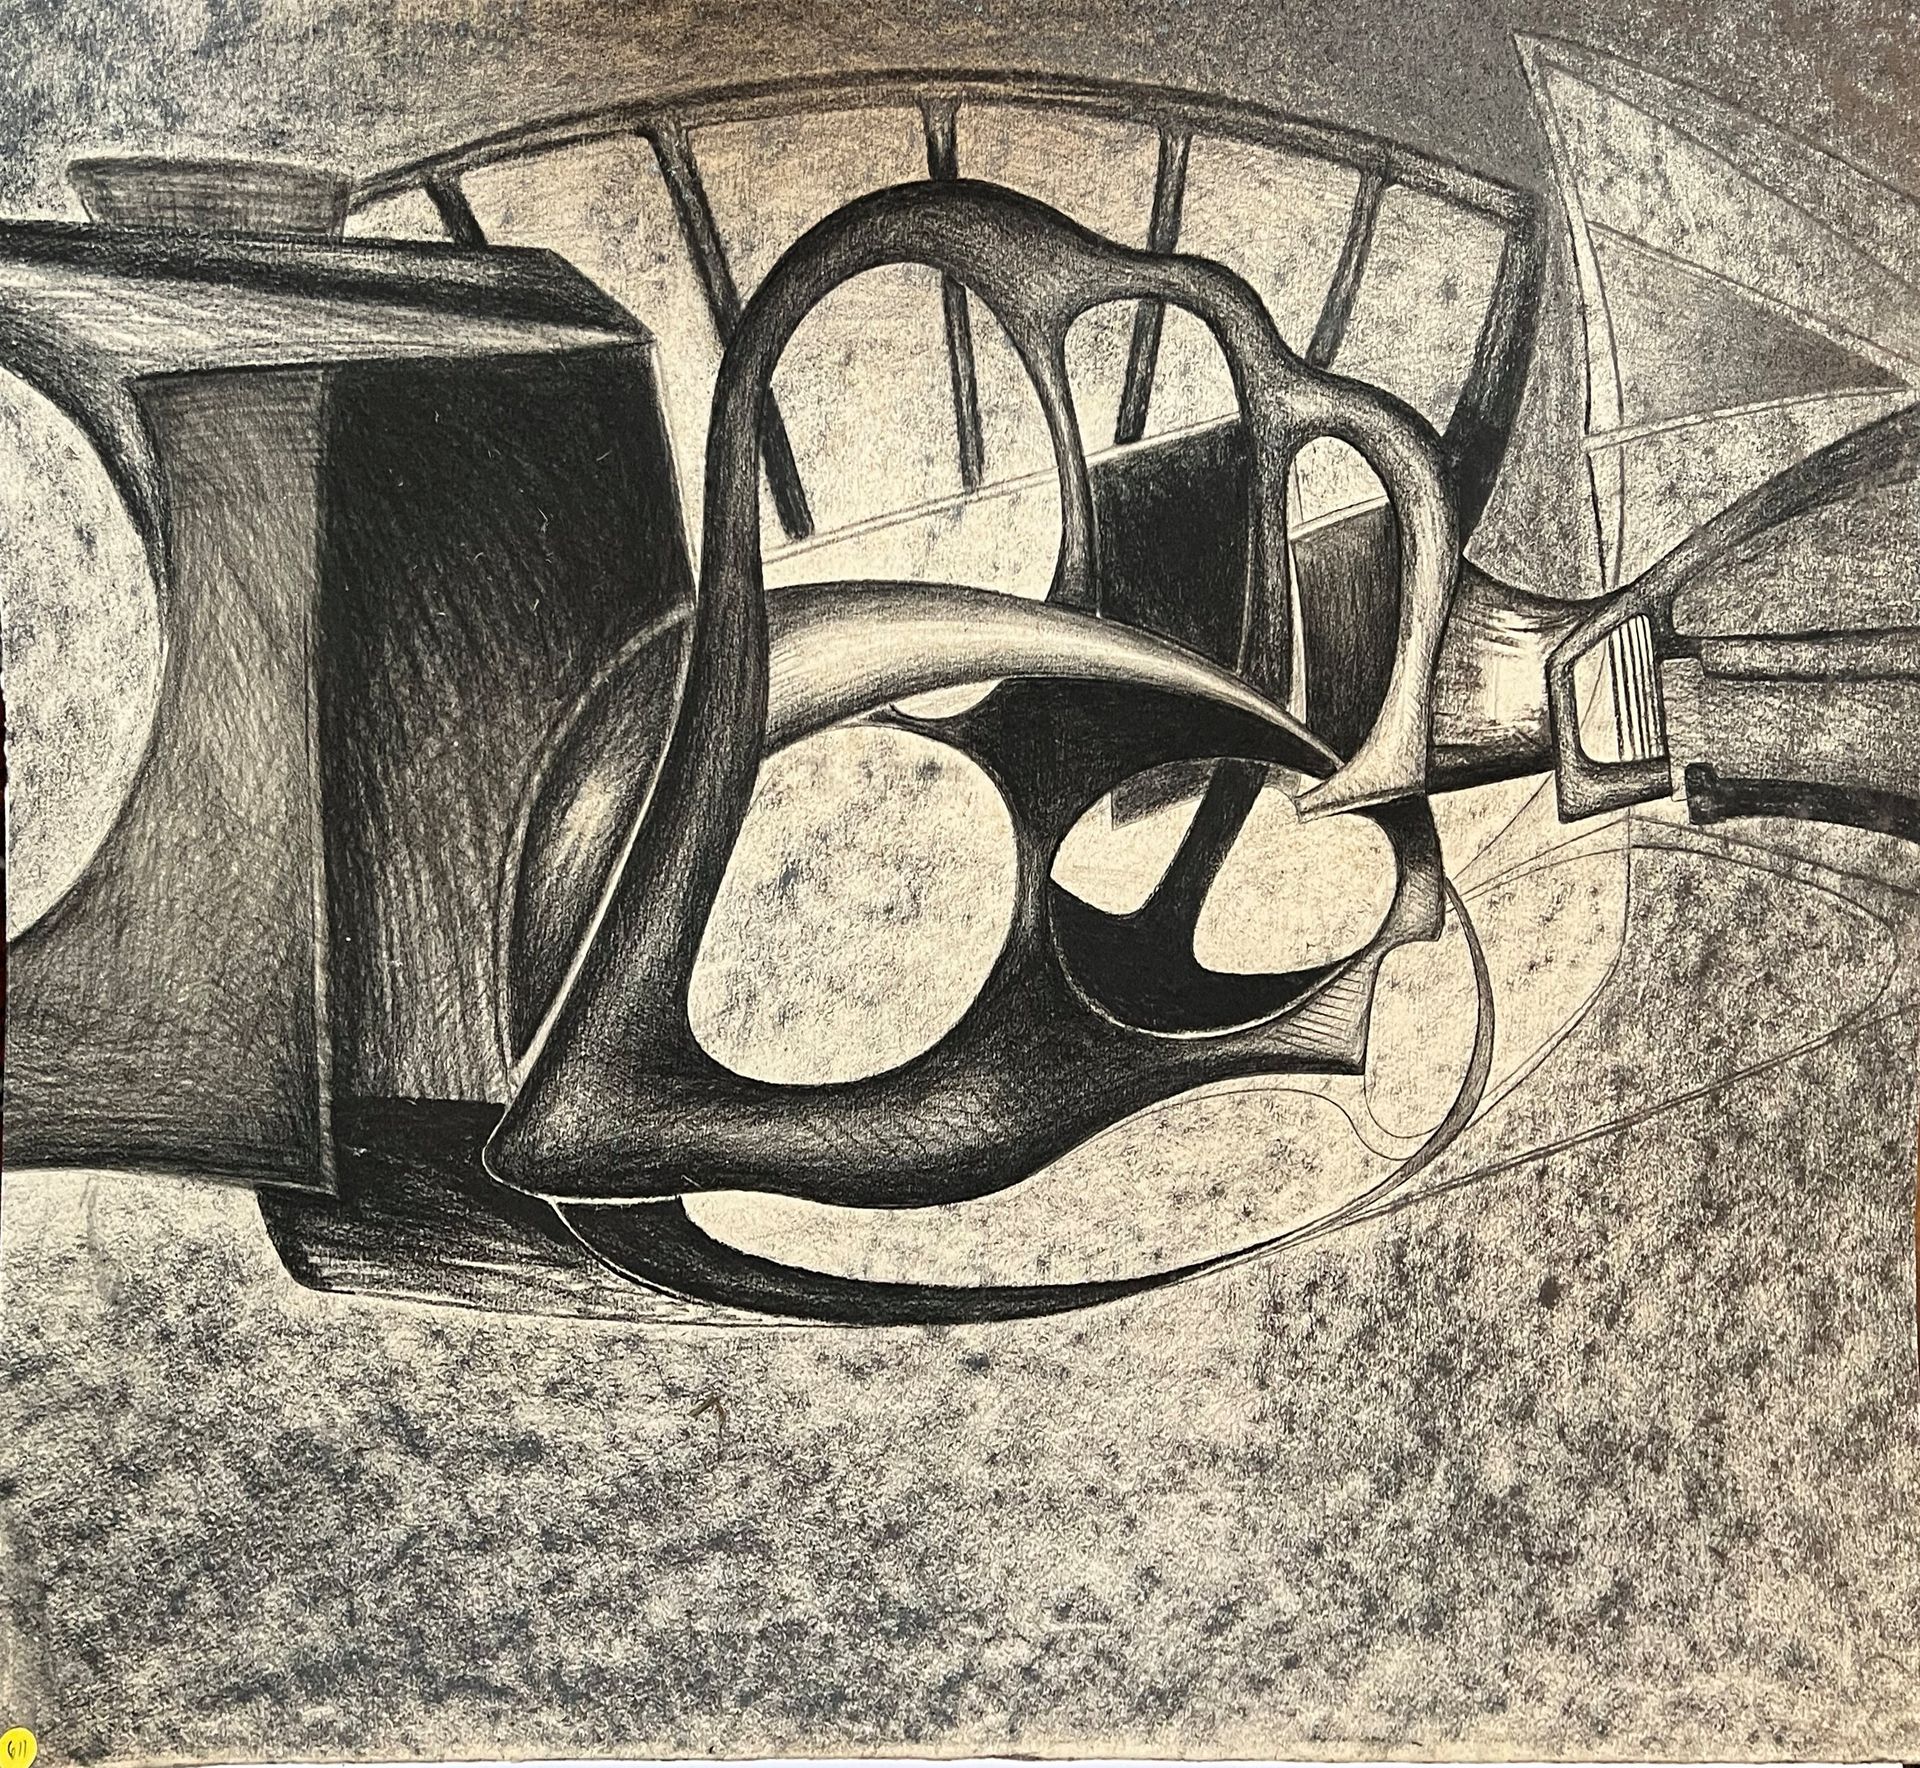 Null Christian ODDOUX (1947-2022), "Composition", charcoal, H: 63 cm, W: 77 cm

&hellip;